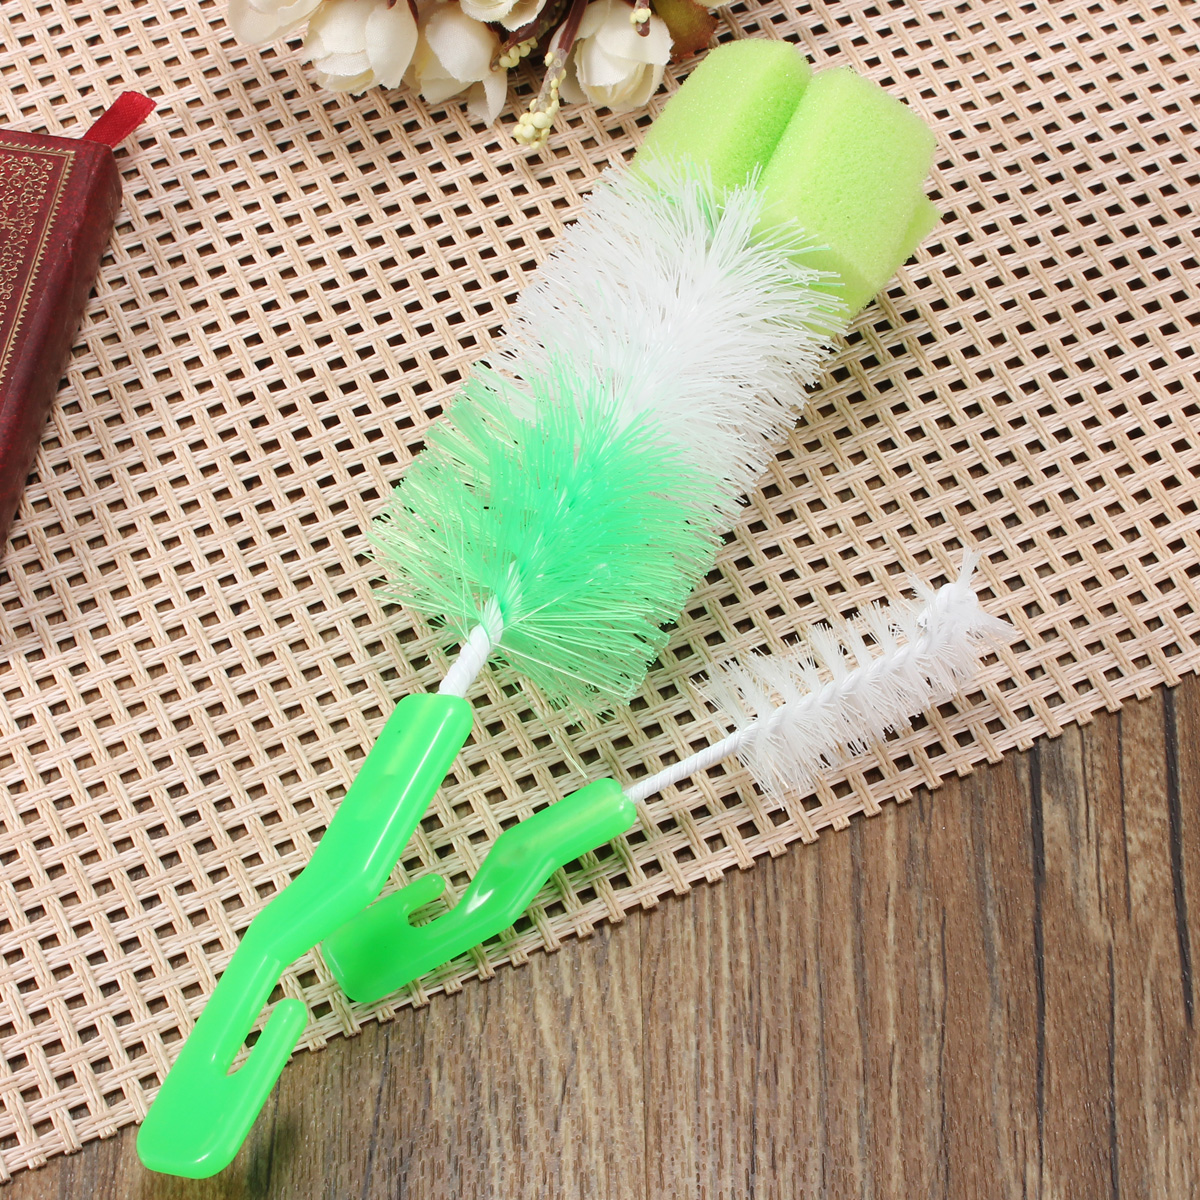 Cleaning-Brush-Cleaner-Baby-Bottle-Spout-Cup-Glass-Teapot-Washing-Cleaning-Heat-resistant-Tool-1394522